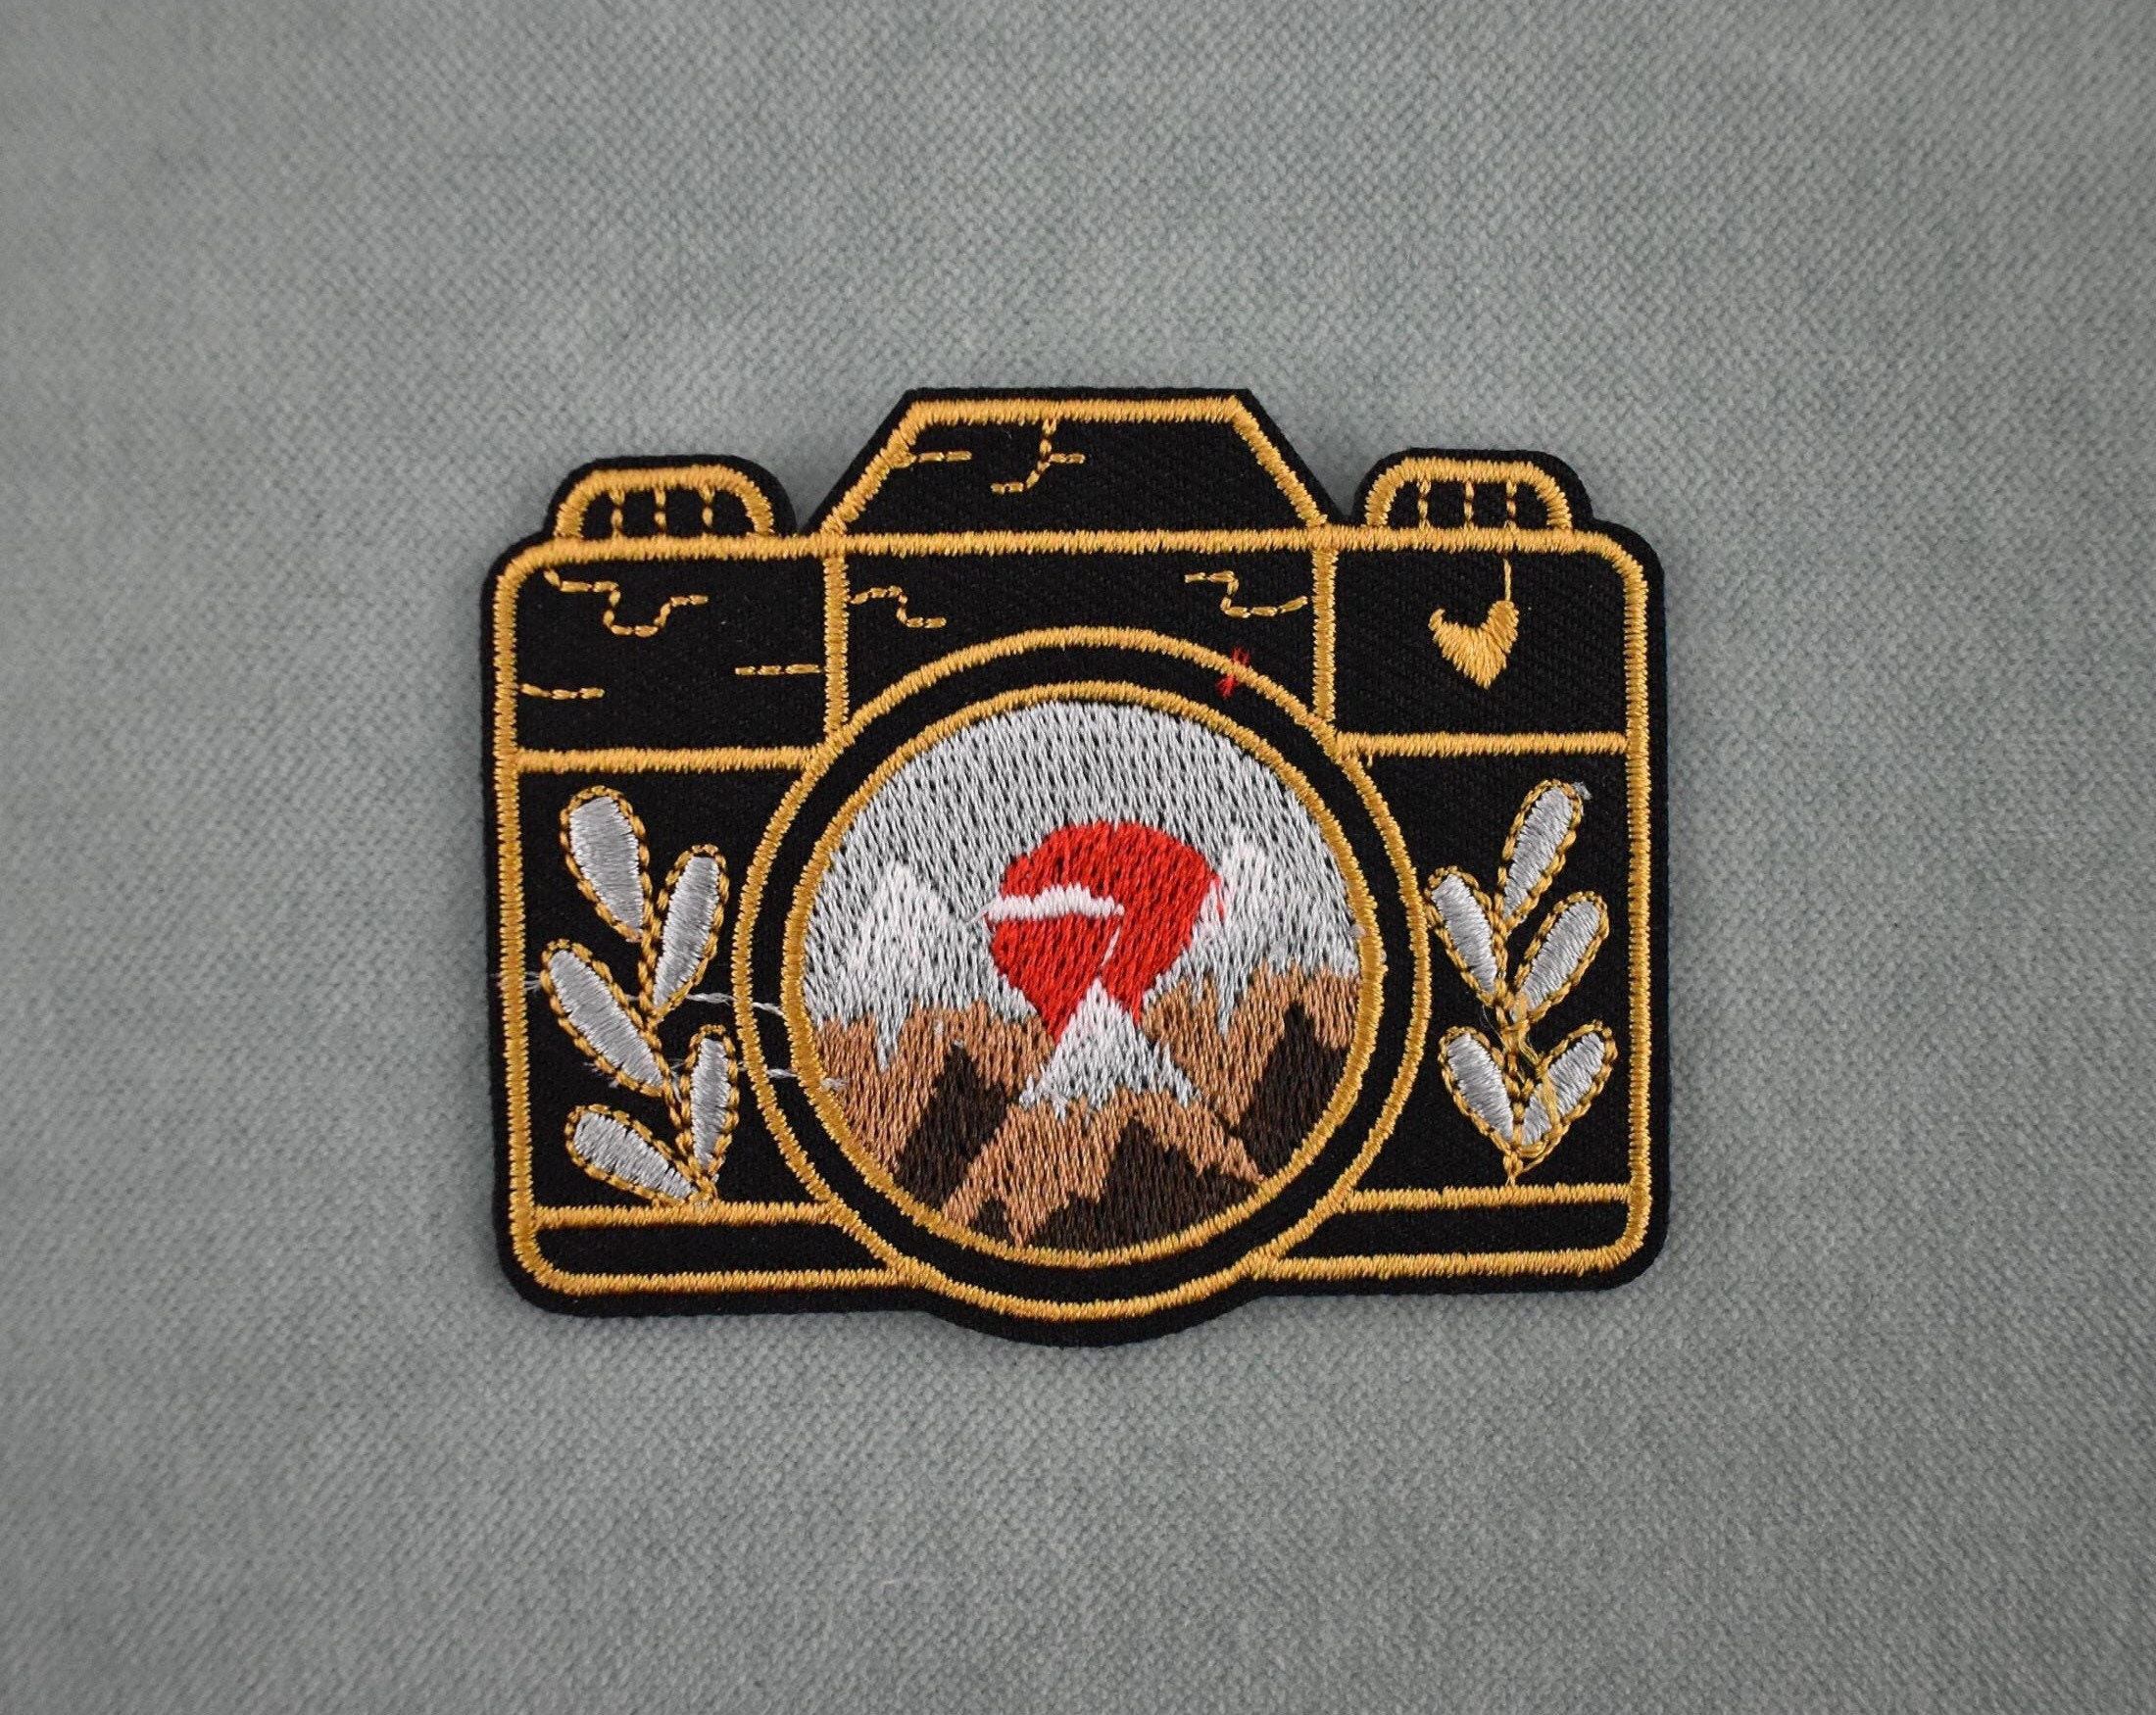 Cassette Tape Embroidery Patch Iron On Patches For Clothing Thermoadhesive  Patches On Clothes Camera Radio Patch Hook Loop Badge